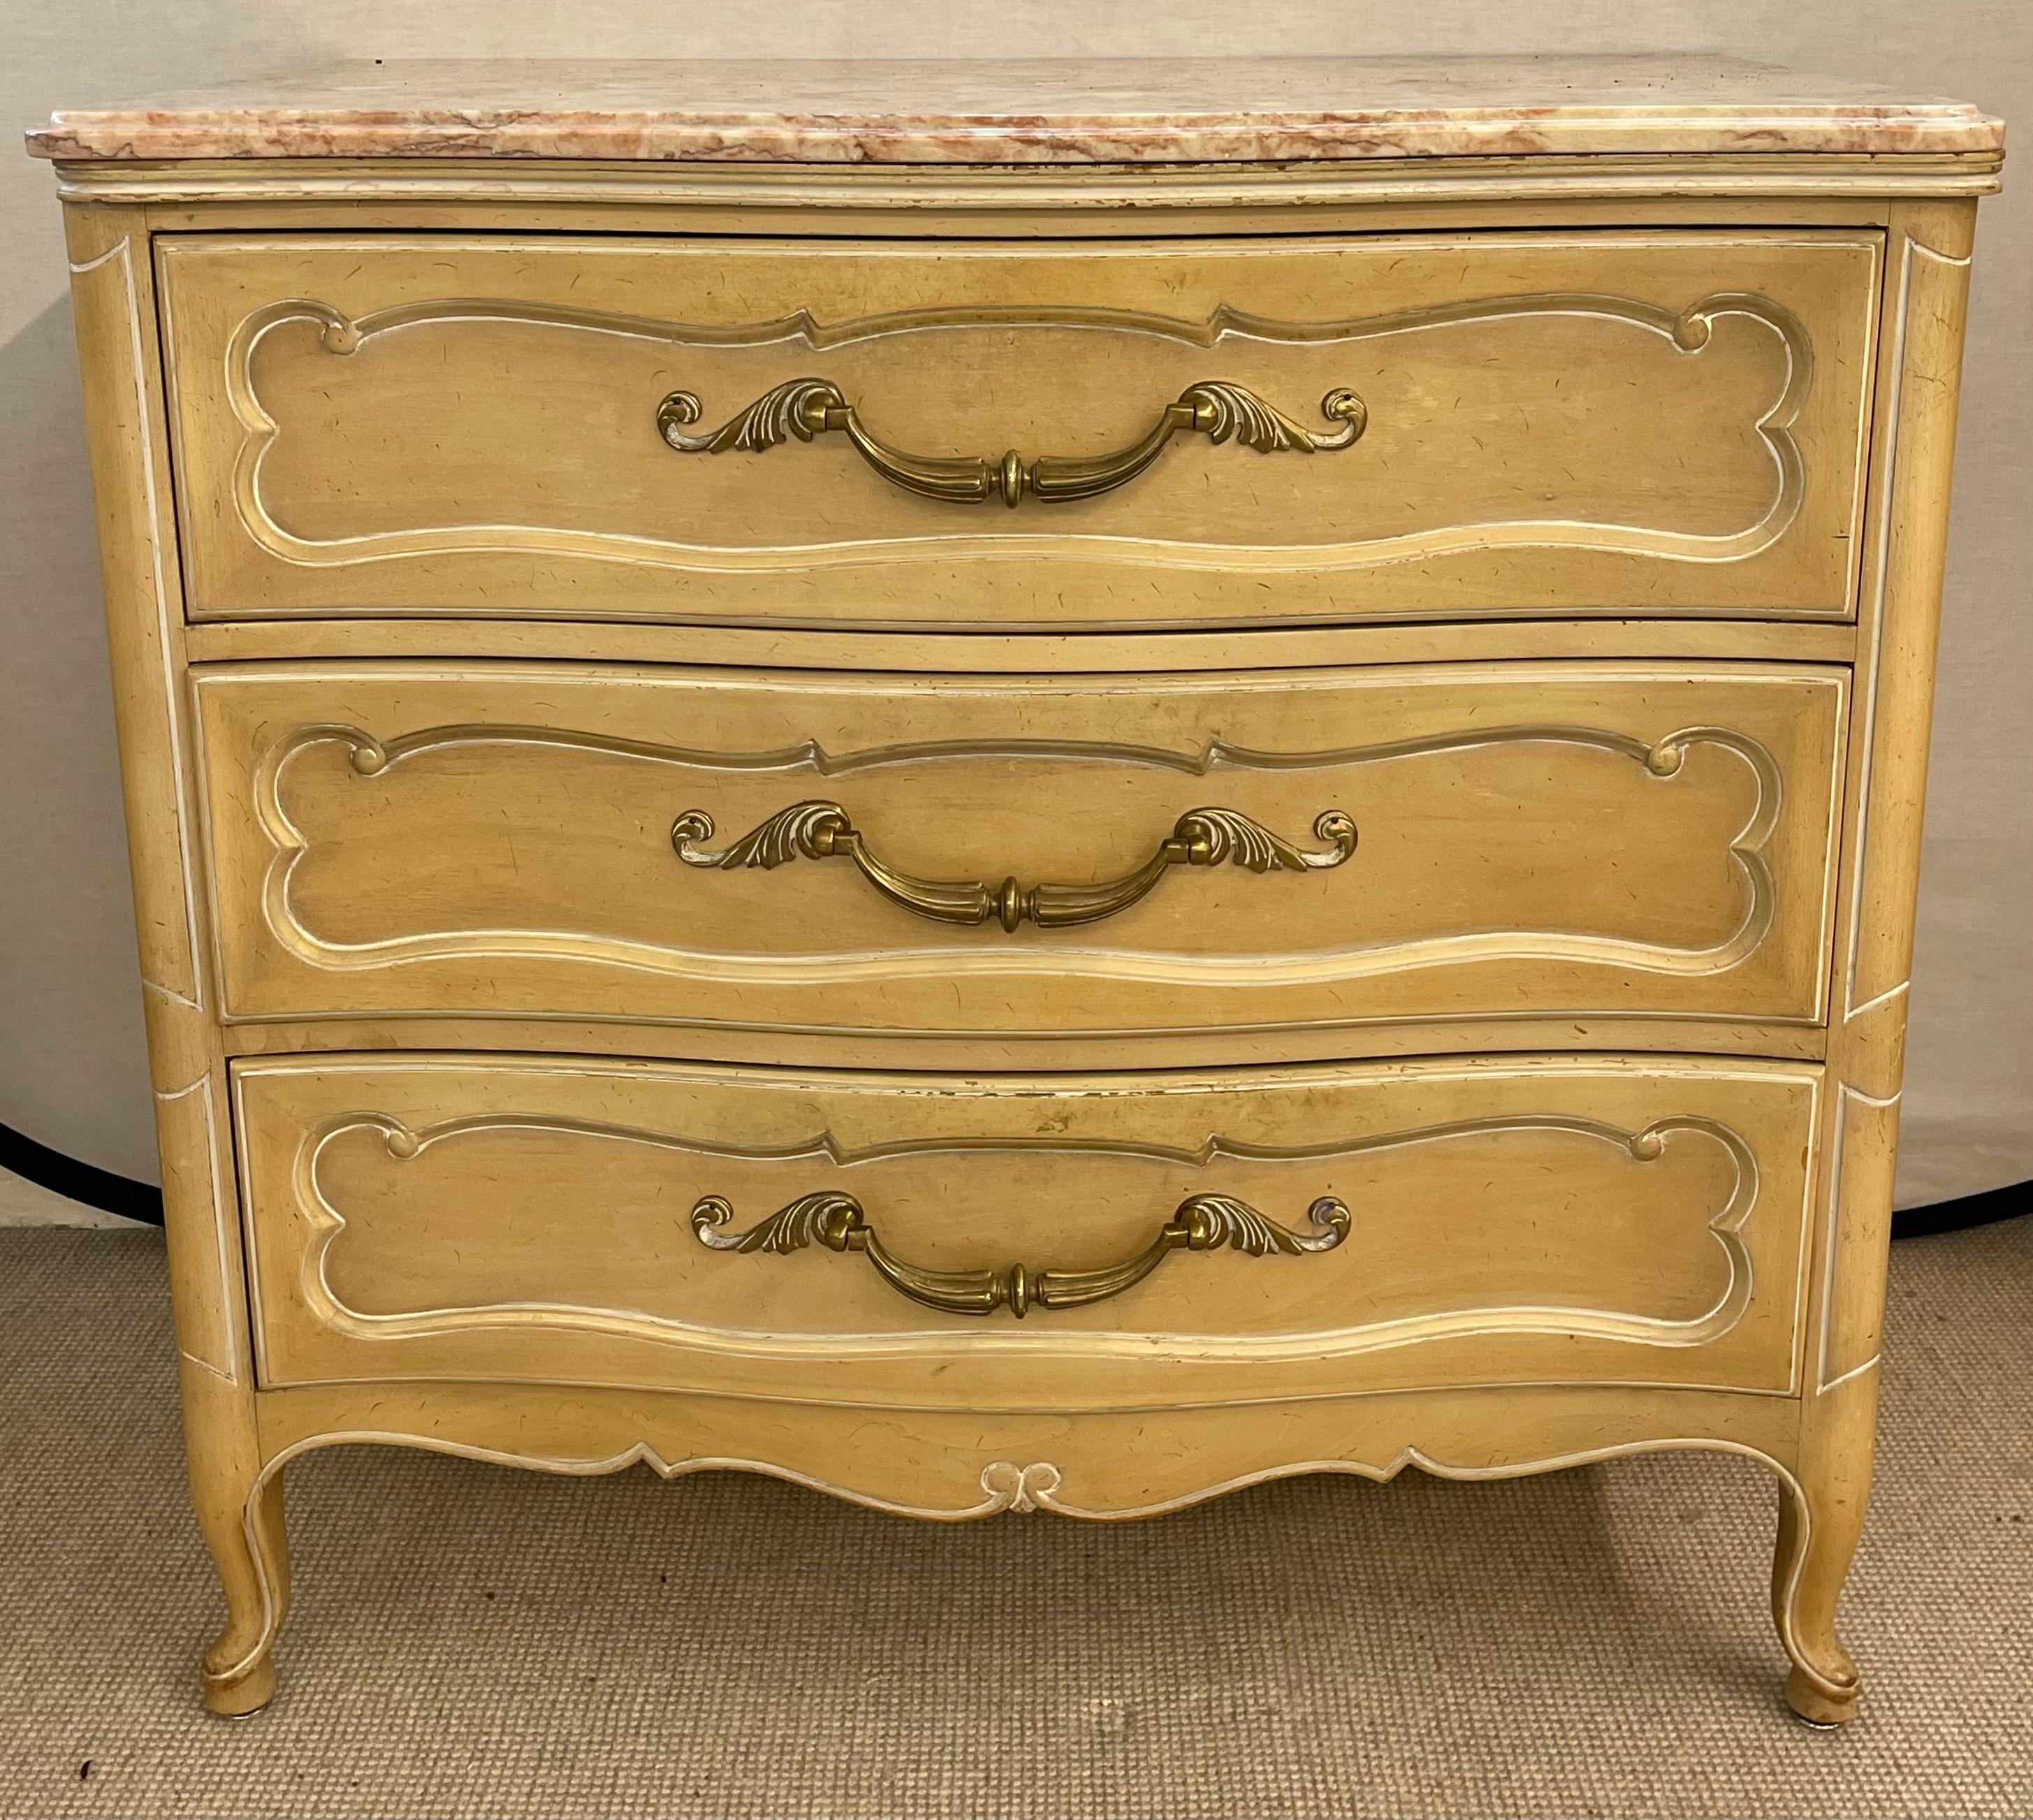 Pair Of Louis XV Style Grosfeld House Marble-Top Distressed Four-Drawer Commodes In Good Condition For Sale In Stamford, CT